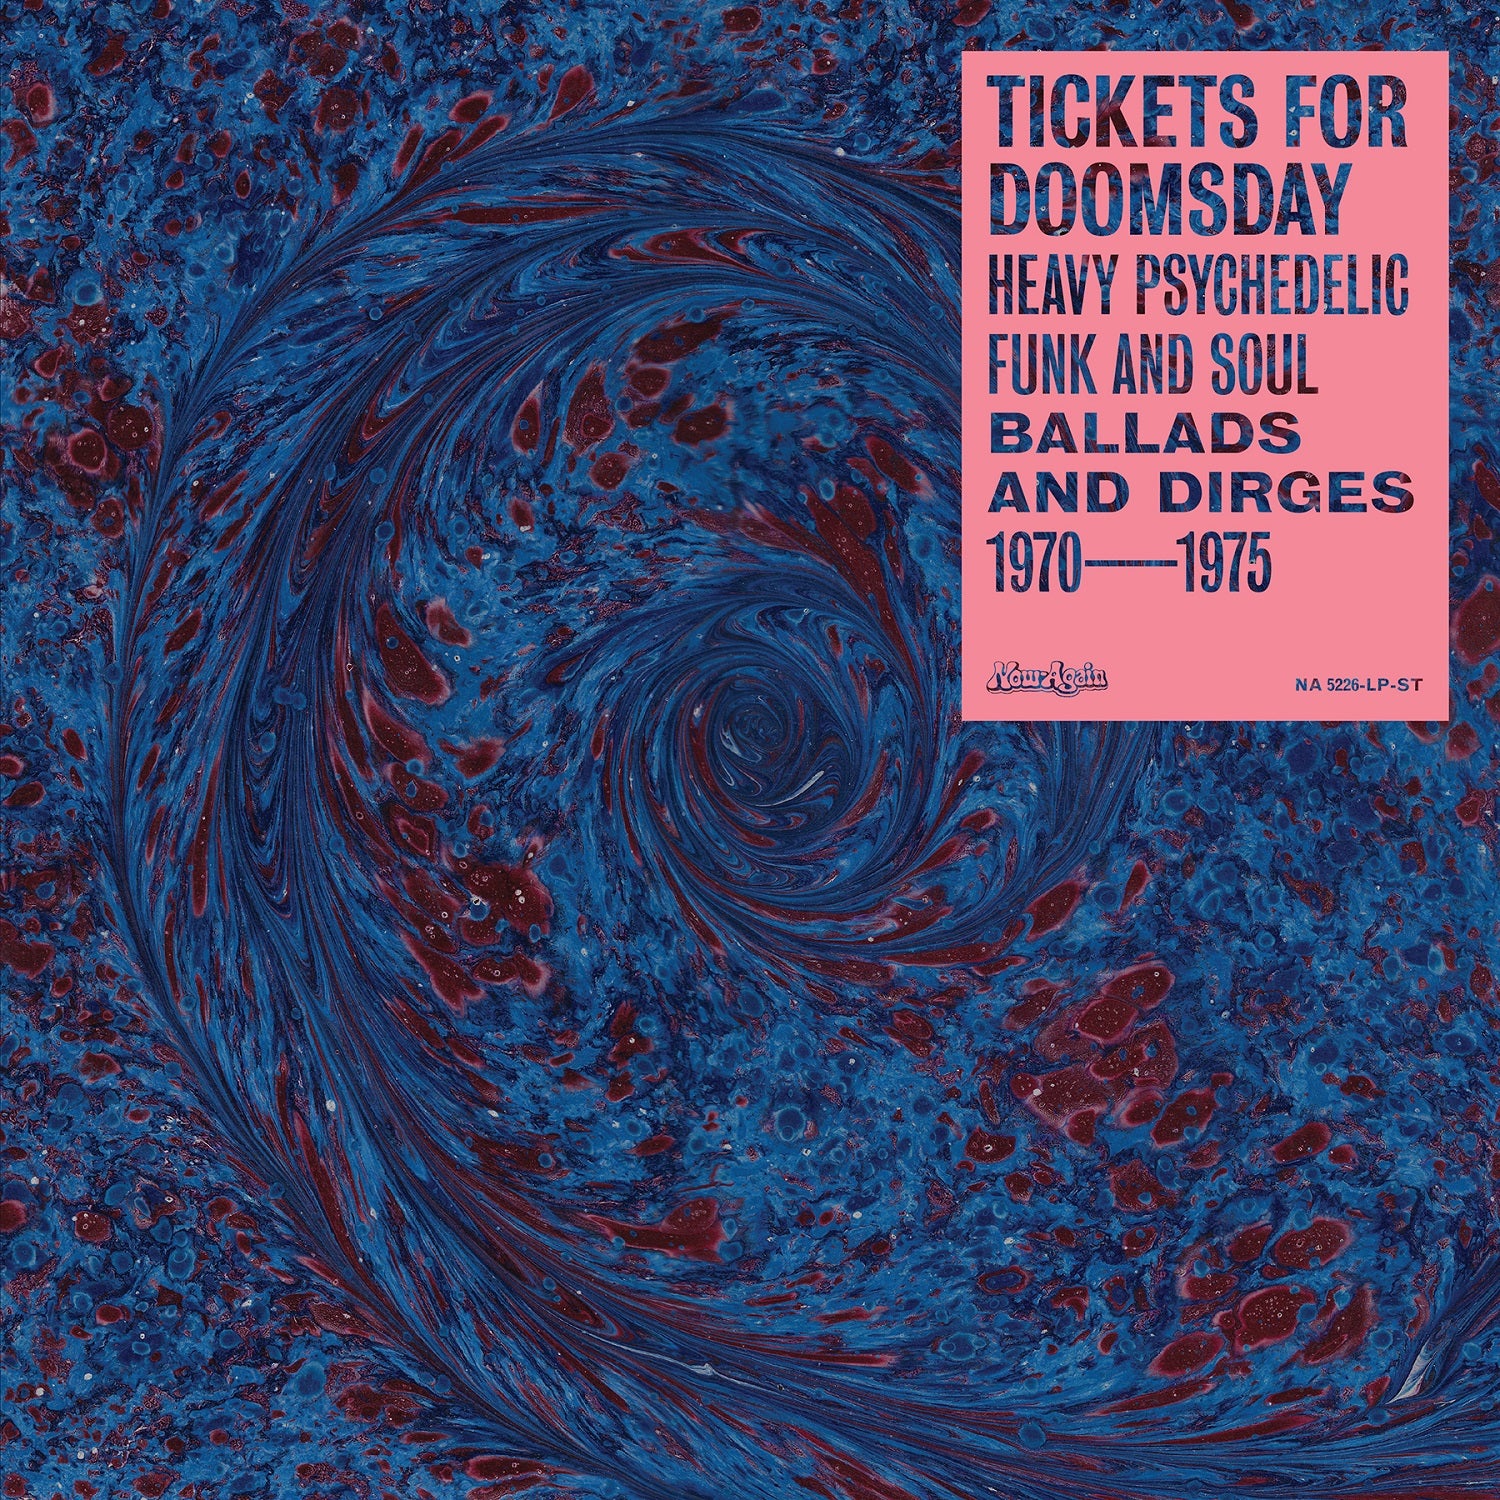 Tickets For Doomsday: Heavy Psychedelic Funk, Soul, Ballads & Dirges 1970-1975